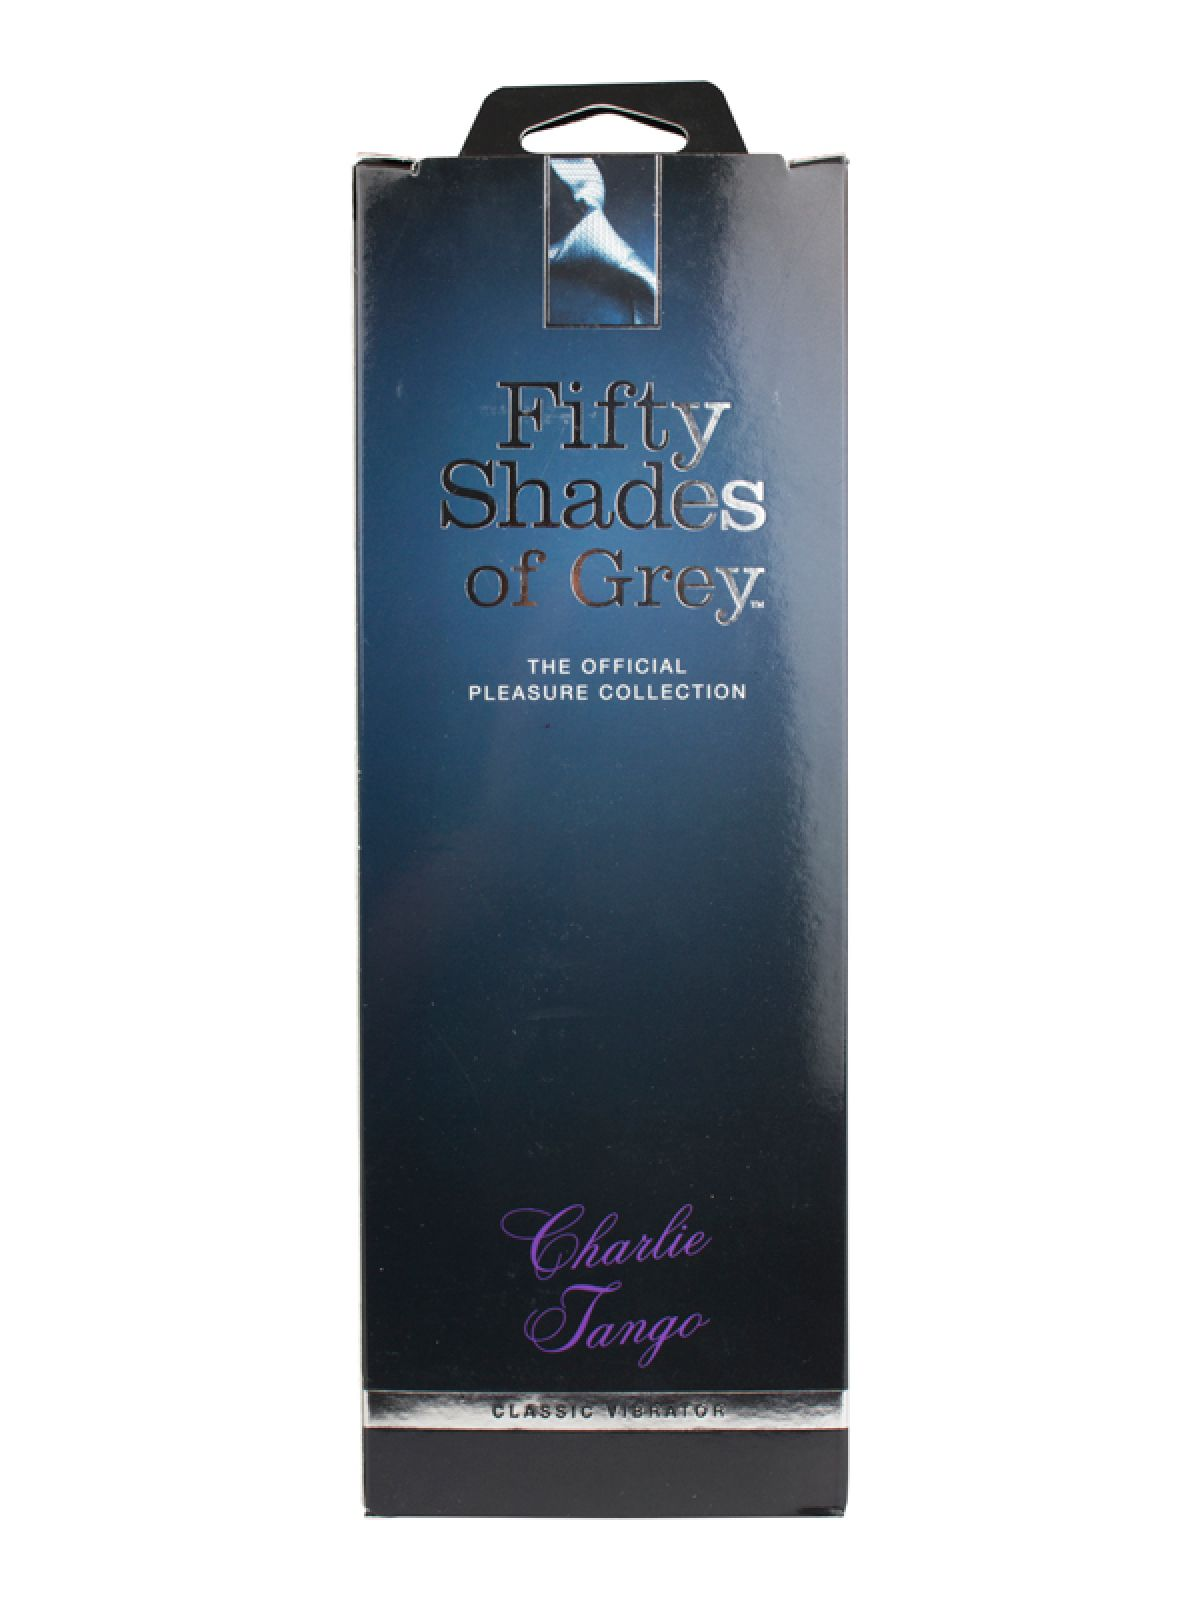 FIFTY SHADES OF GREY \'\'Charlie Fifty Tango\'&# vibrator Klassieke classic-vibrators Grey Shades Of 